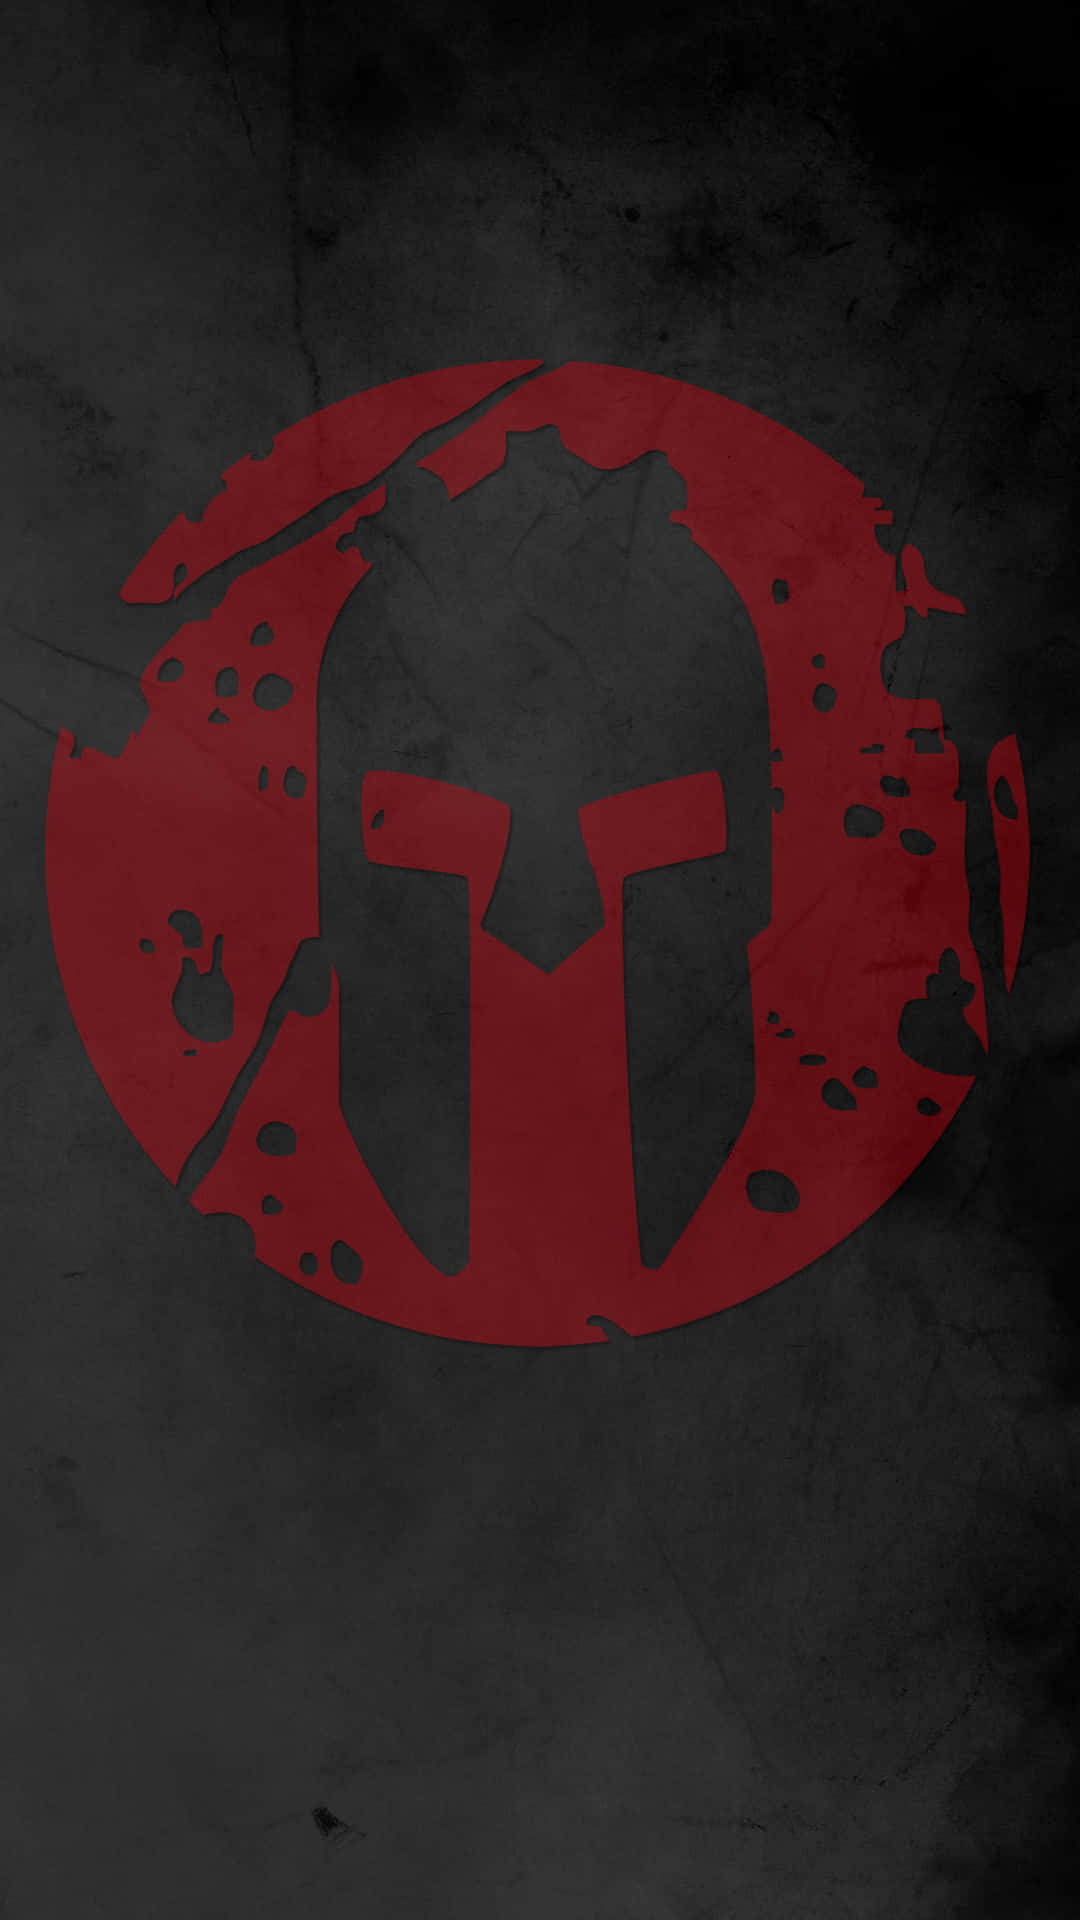 Spartan Logo Wallpaper - Wallpapers For Your Phone Wallpaper